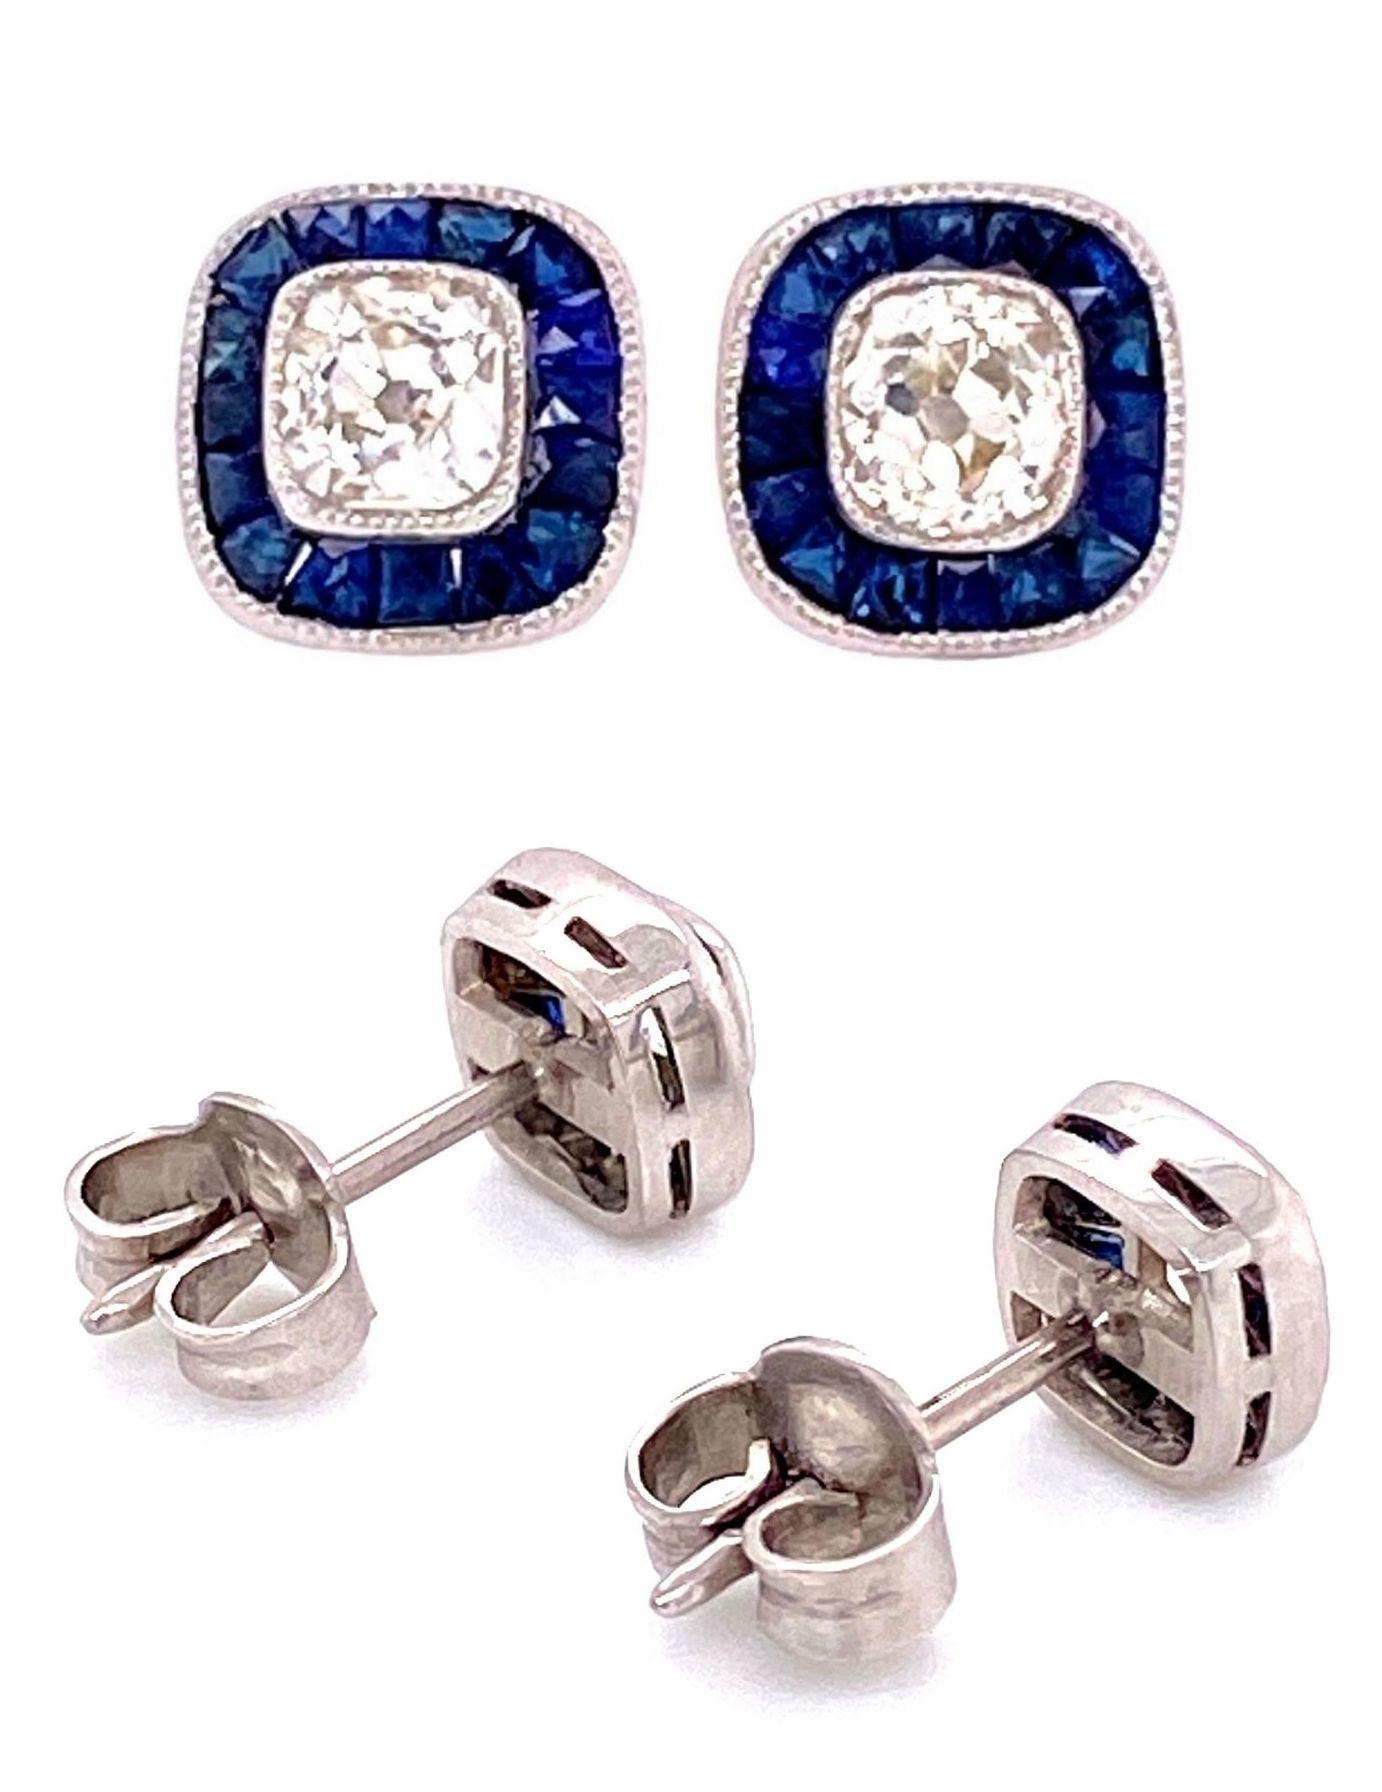 Beautiful and finely detailed Stud Earrings center securely set with Cushion-cut Diamonds, approx. total weight of the 2 Diamonds 0.70 Carats, surrounded by Sapphires, approx. total weight 1.10 Carats. Hand crafted in Platinum. The earrings are in